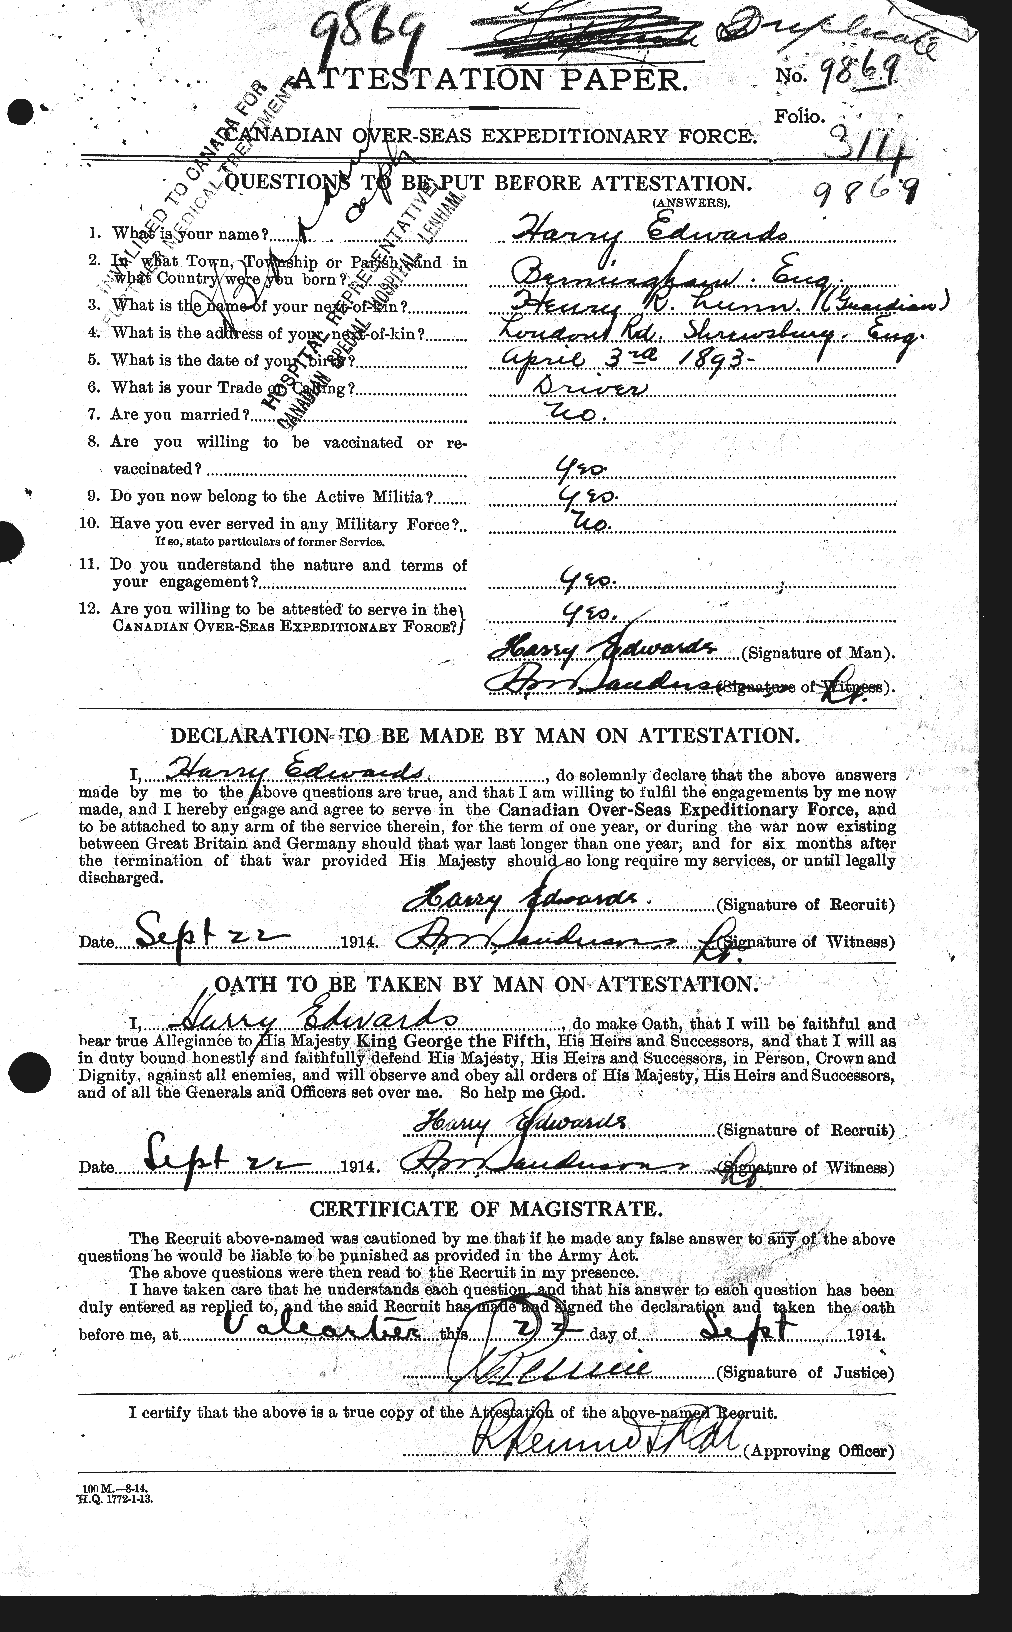 Personnel Records of the First World War - CEF 309728a